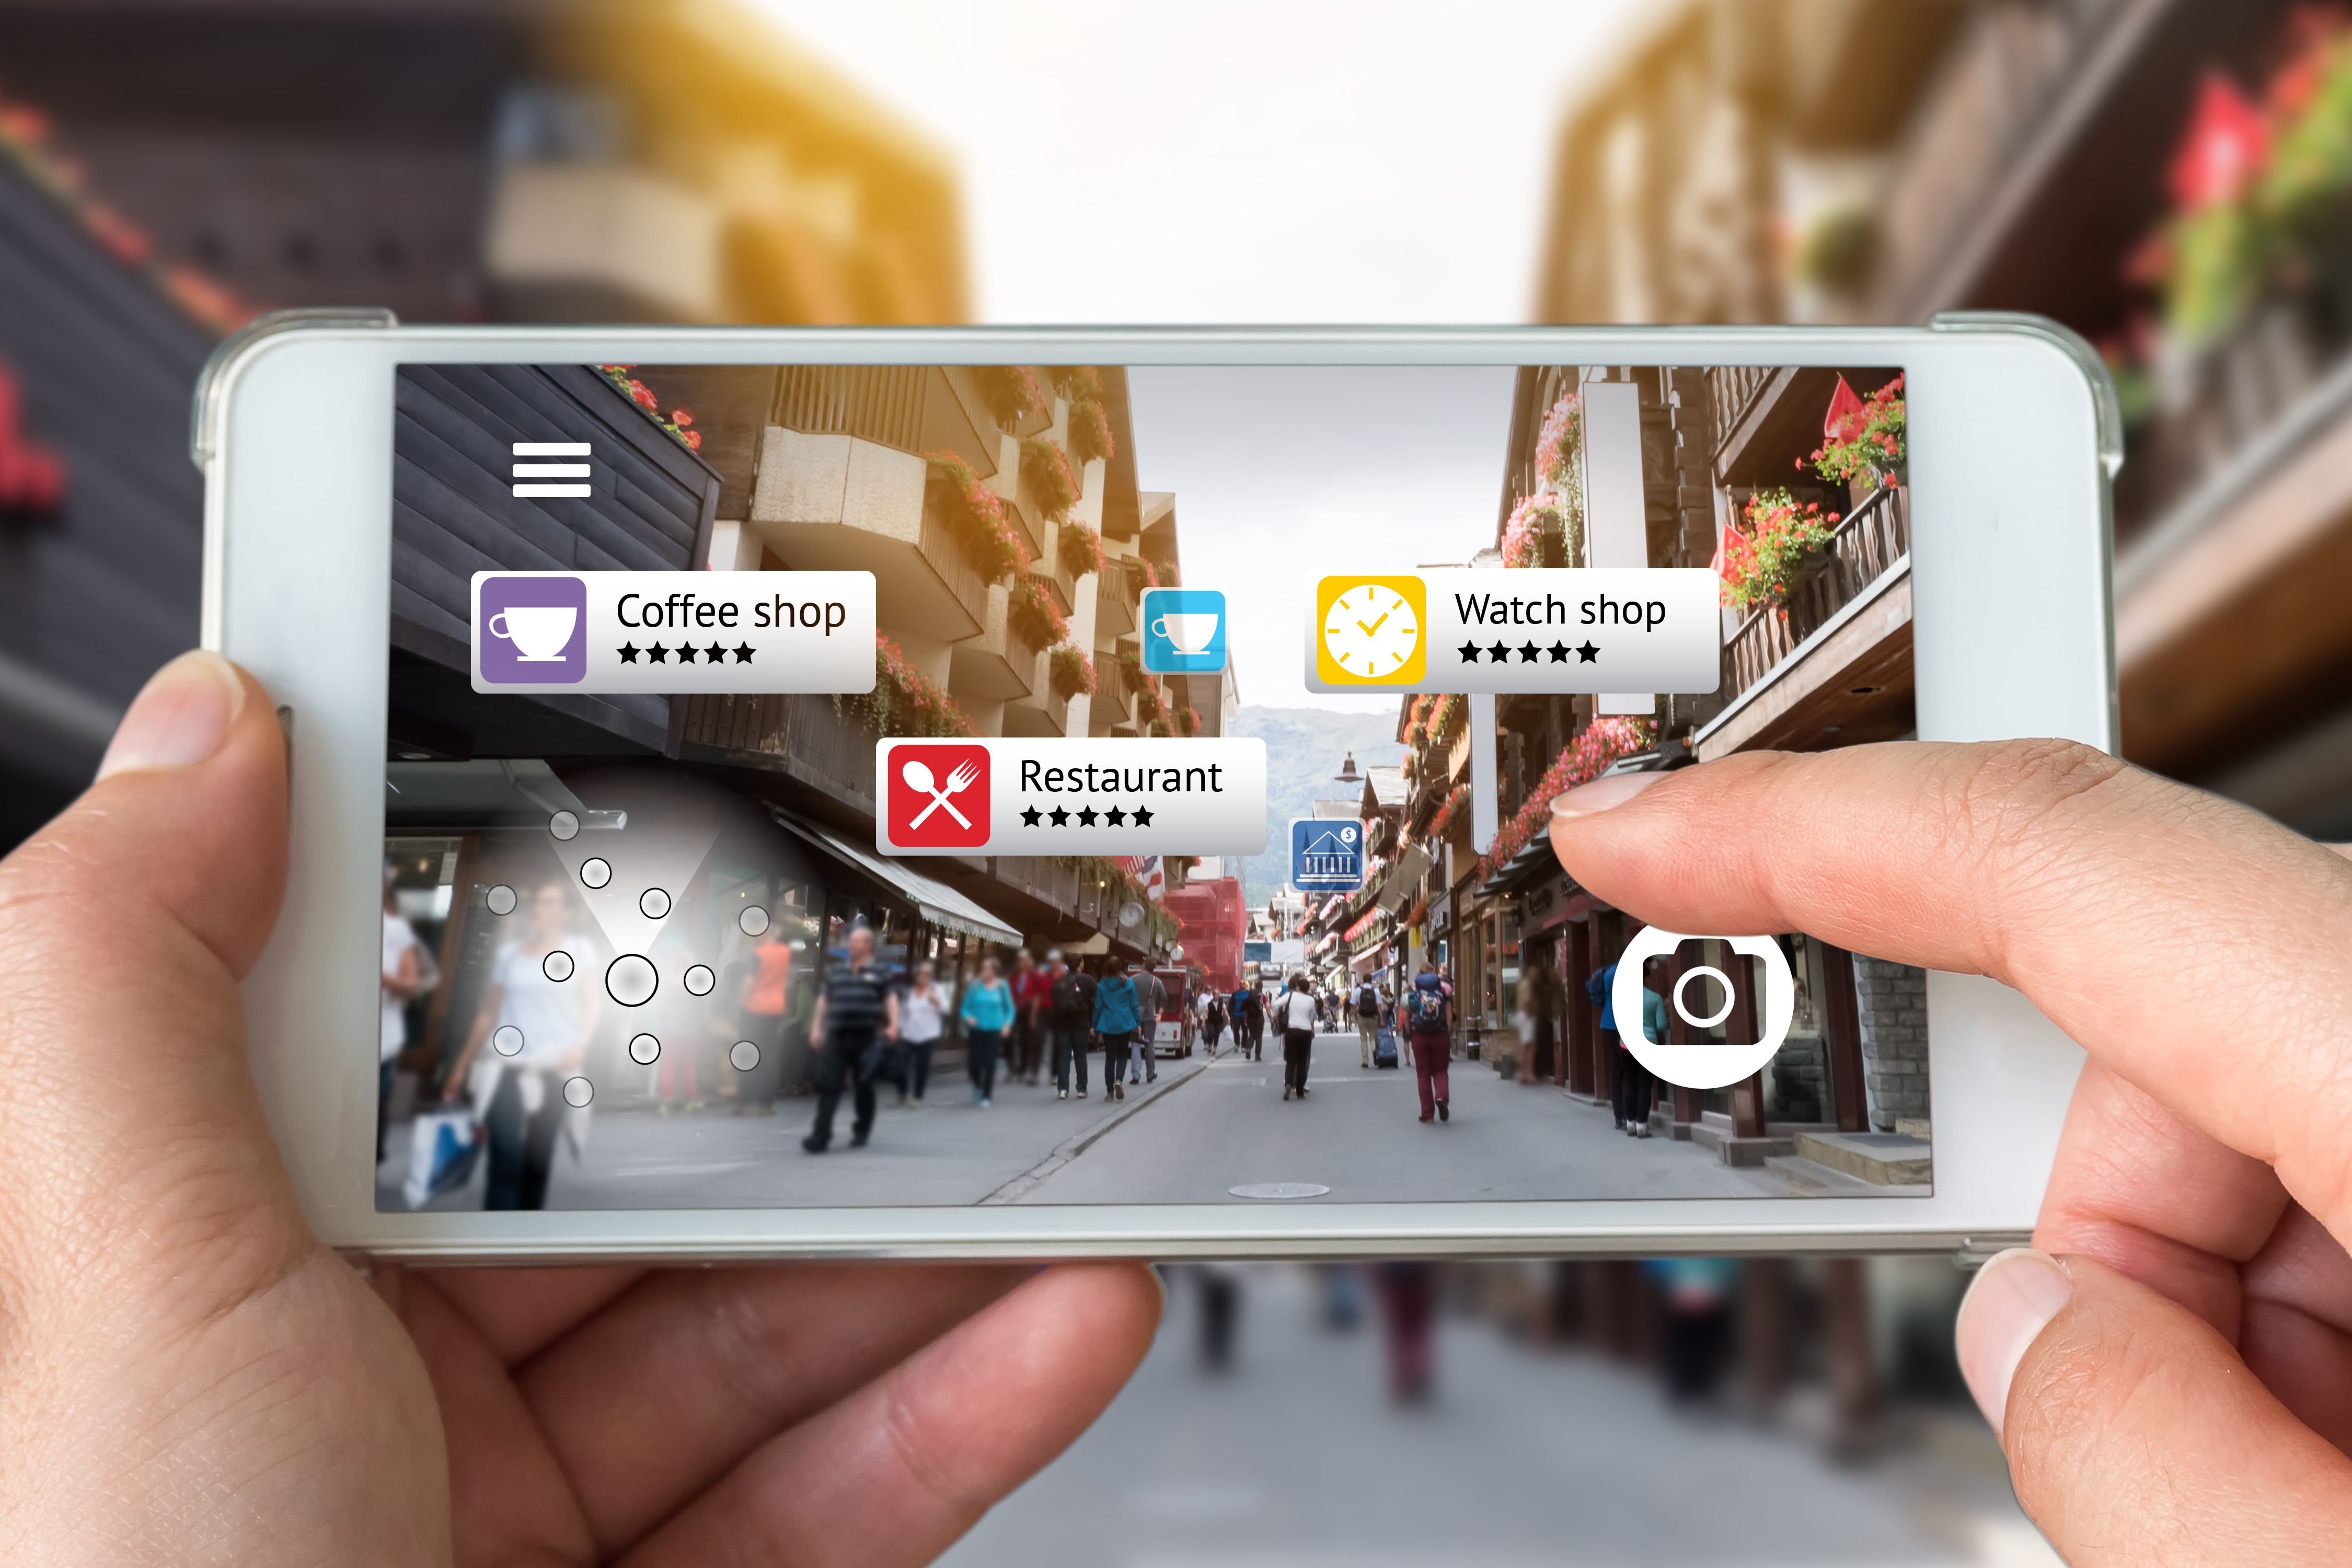 augmented-reality-marketing-concept-hand-holding-smart-phone-use-ar-application-to-check-relevant-information-about-the-spaces-around-customer-city-and-flare-light-background